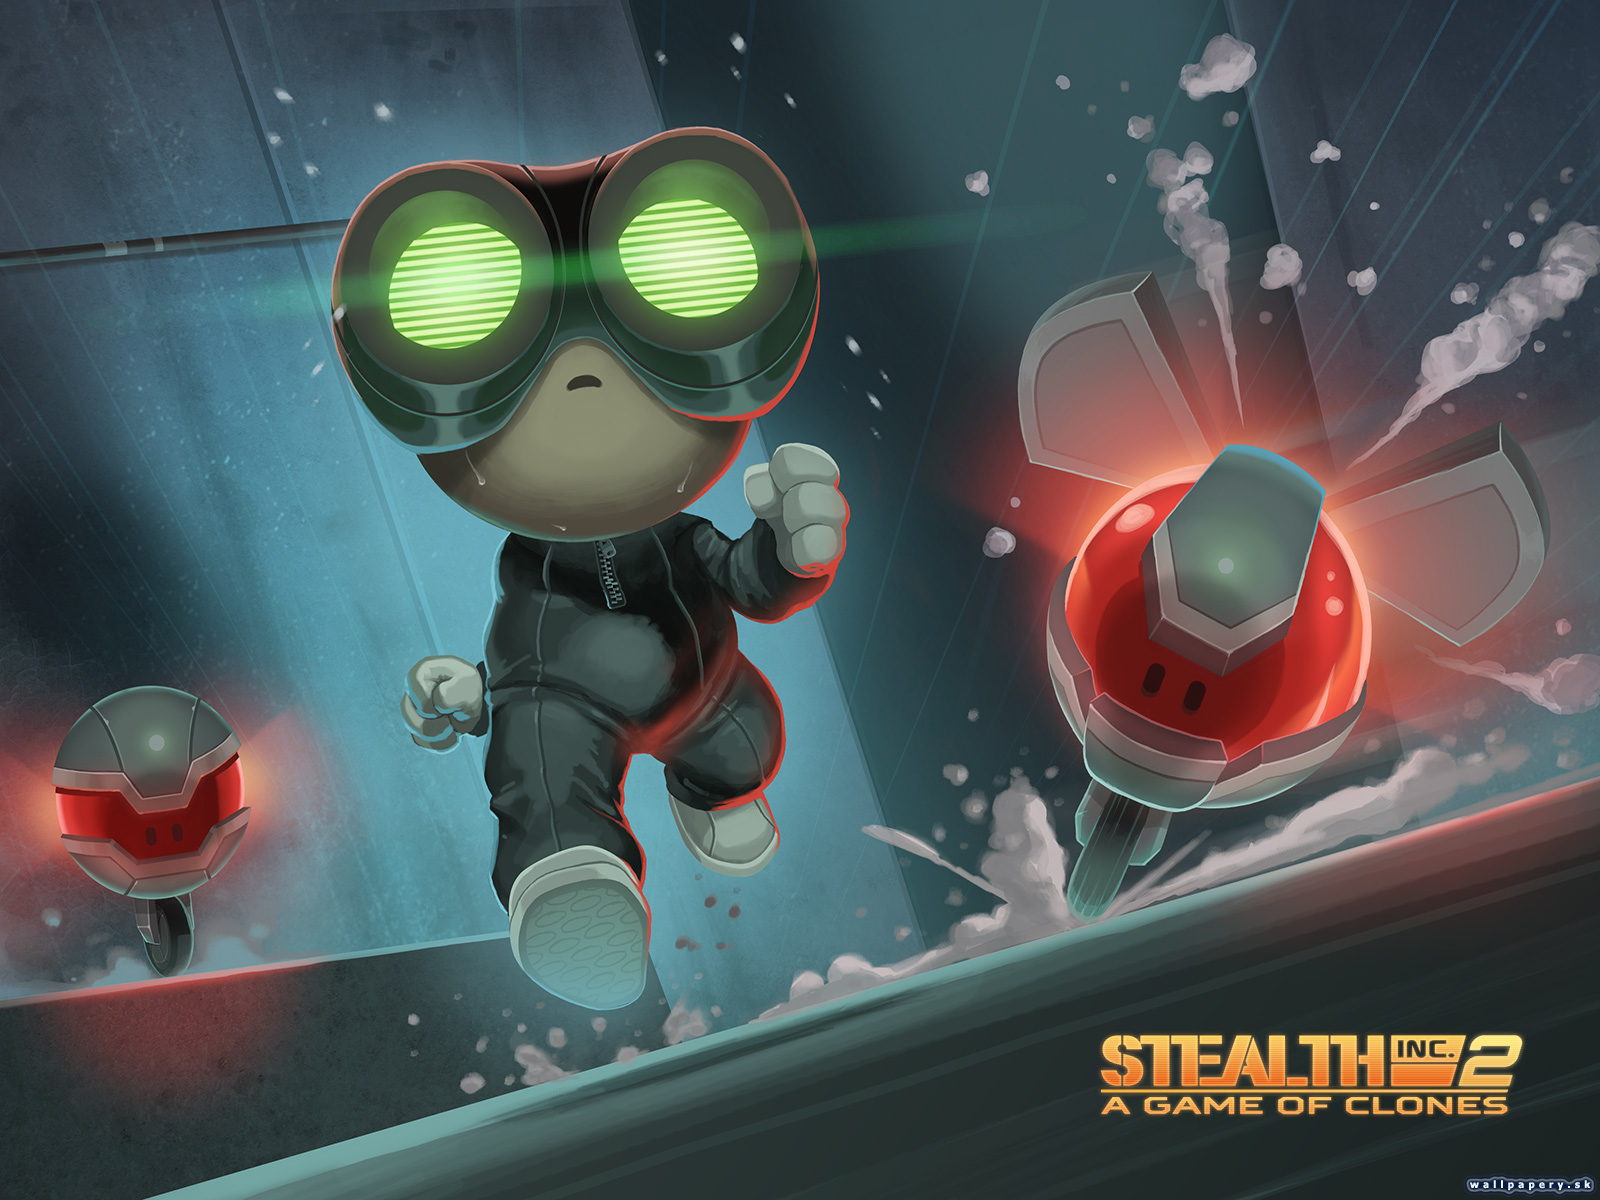 Stealth Inc 2: A Game of Clones - wallpaper 2